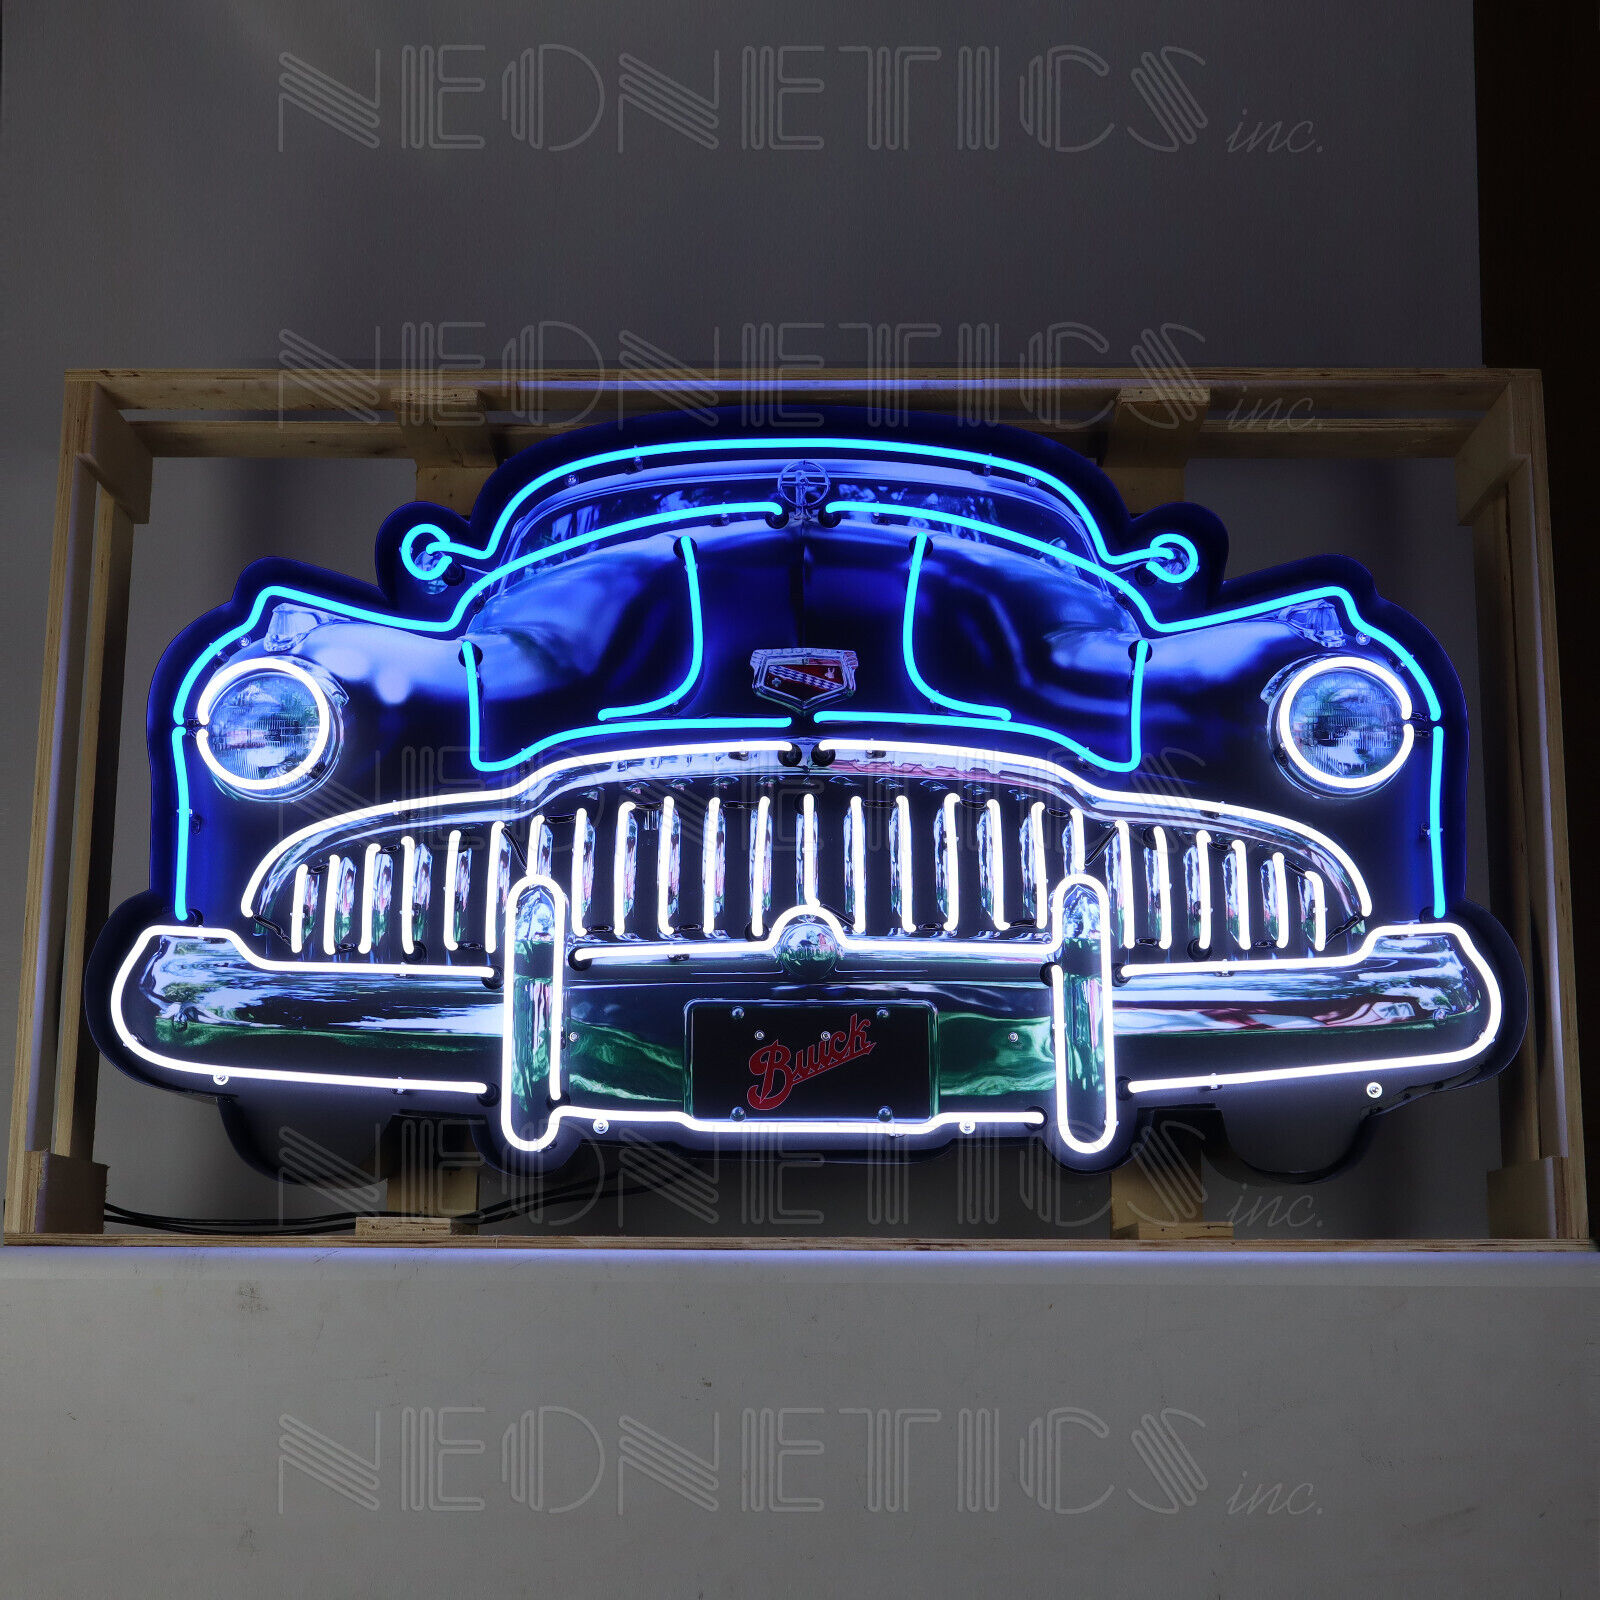 Buick Neon sign Grille solid steel Case Super Roadmaster wall lamp Garage light